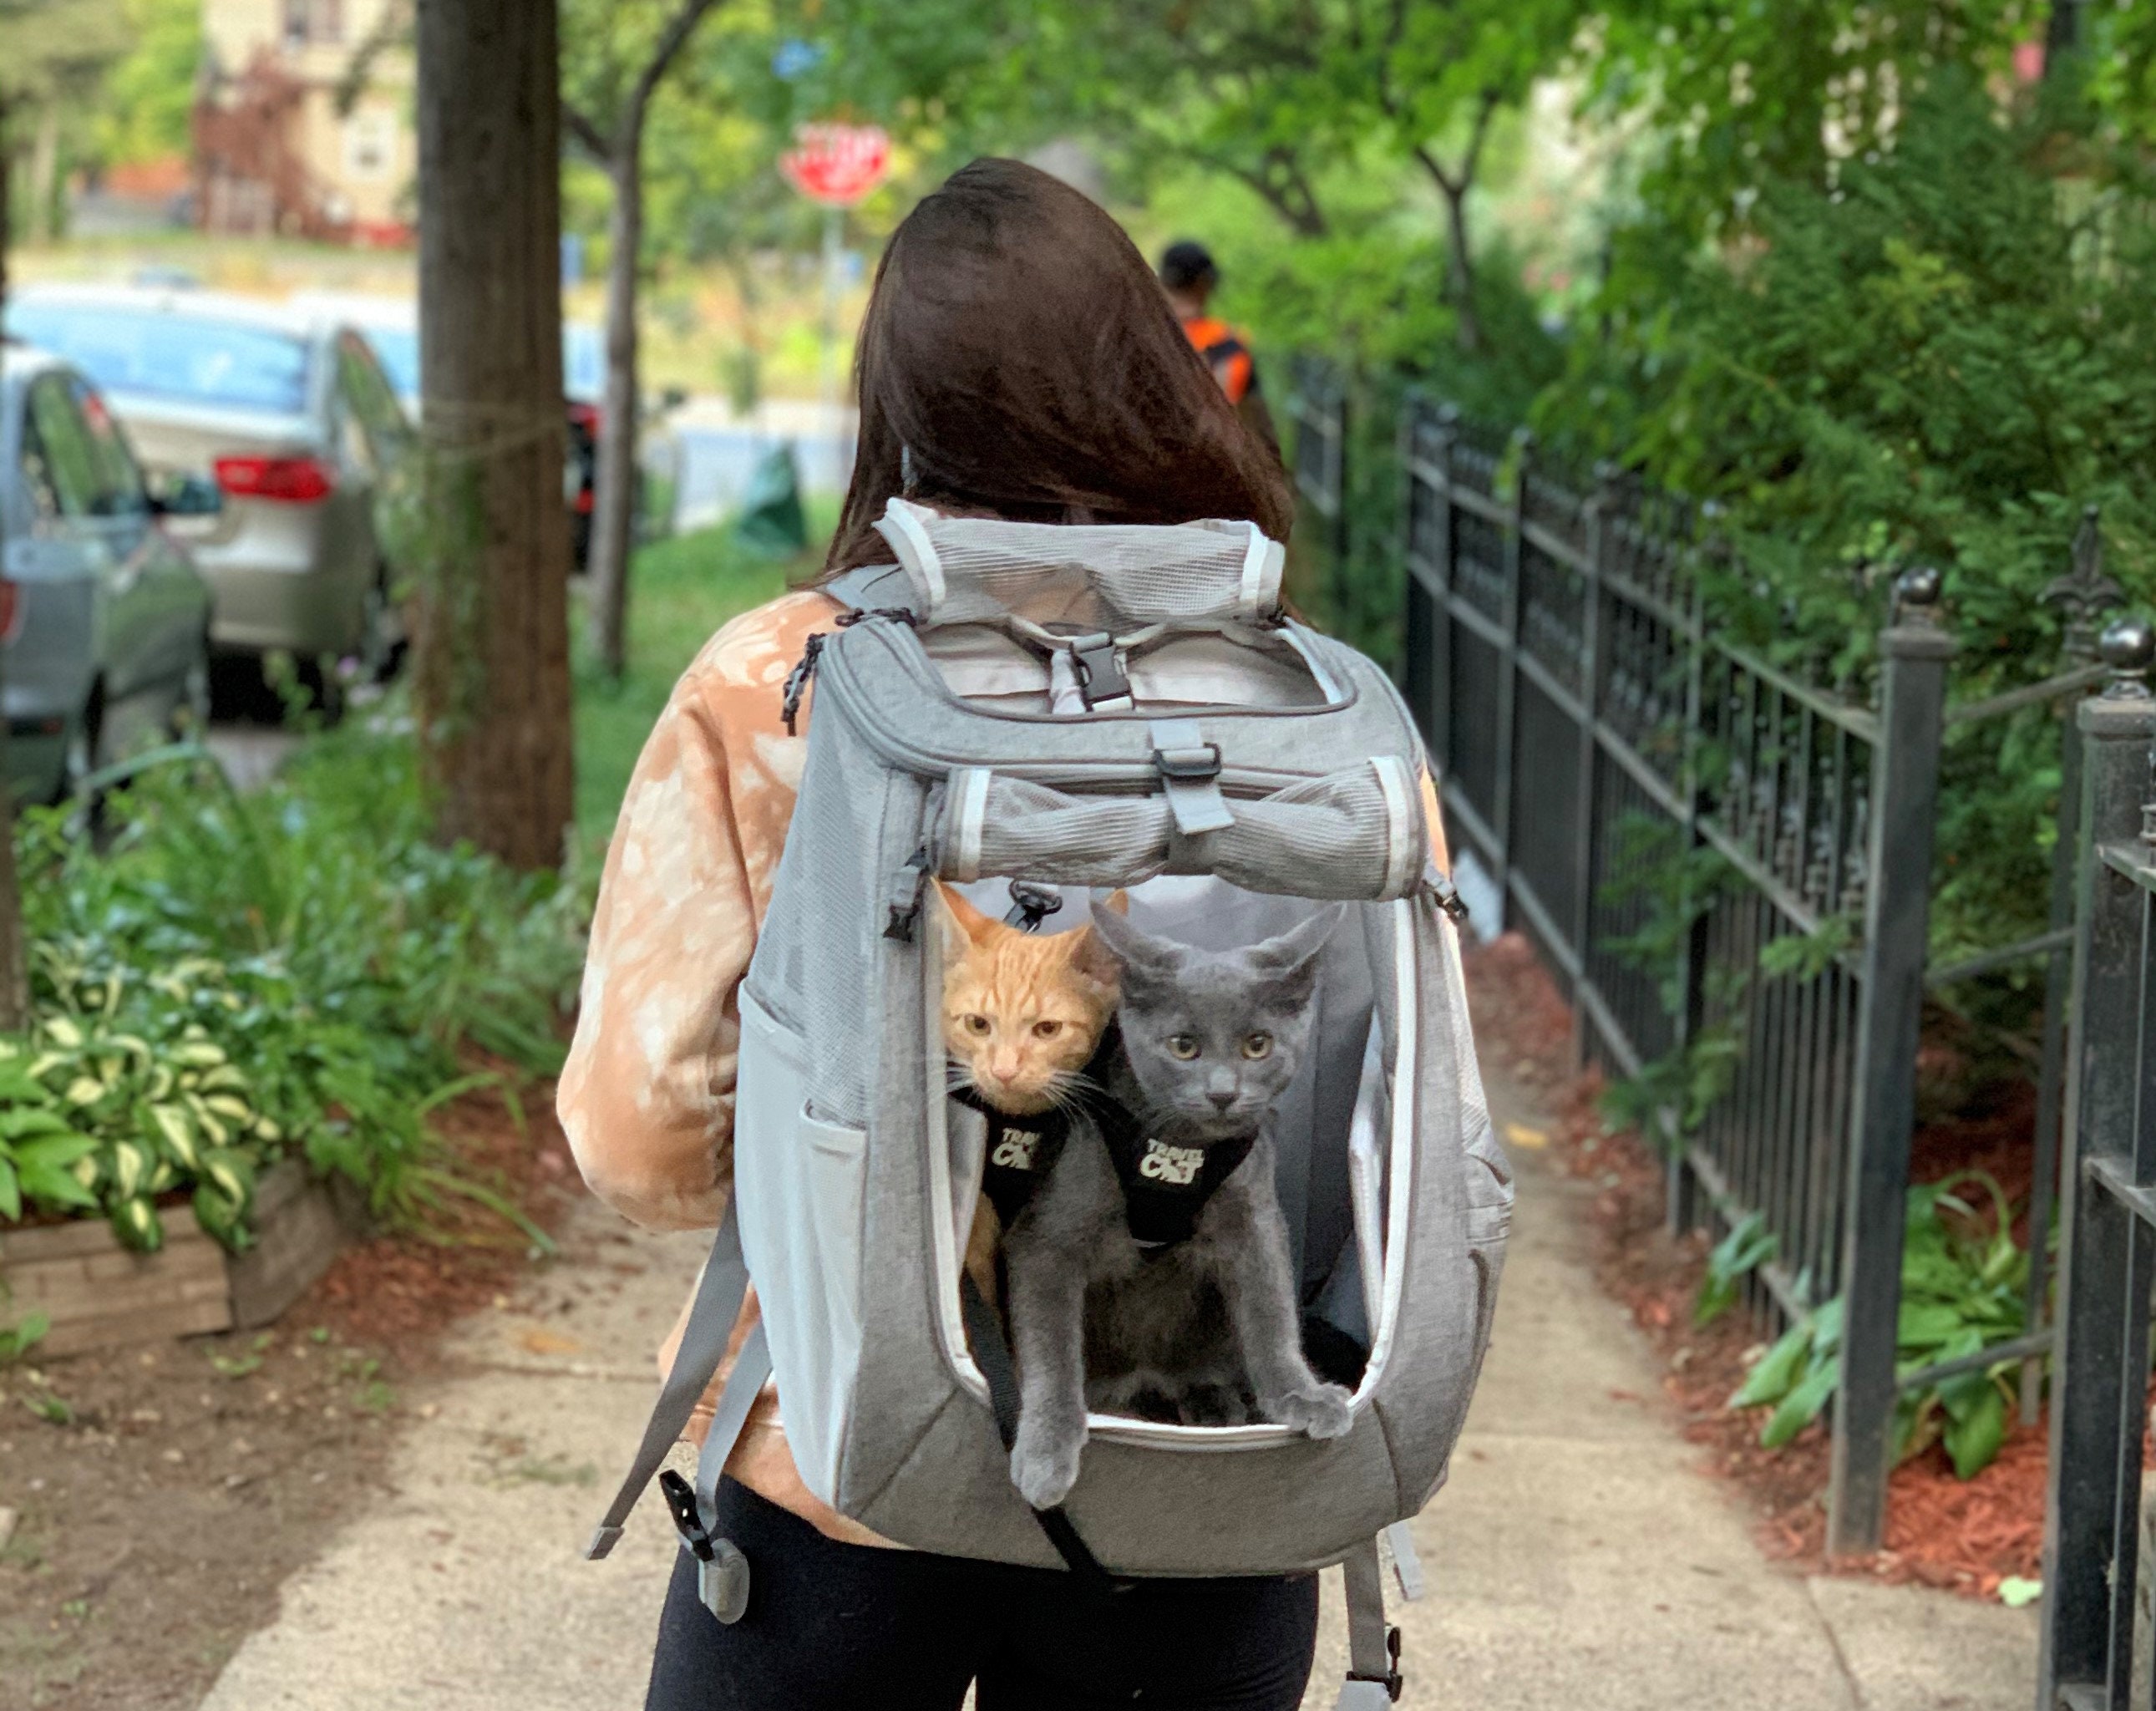 Test Kitties Review the Popular Fat Cat Bubble Backpack